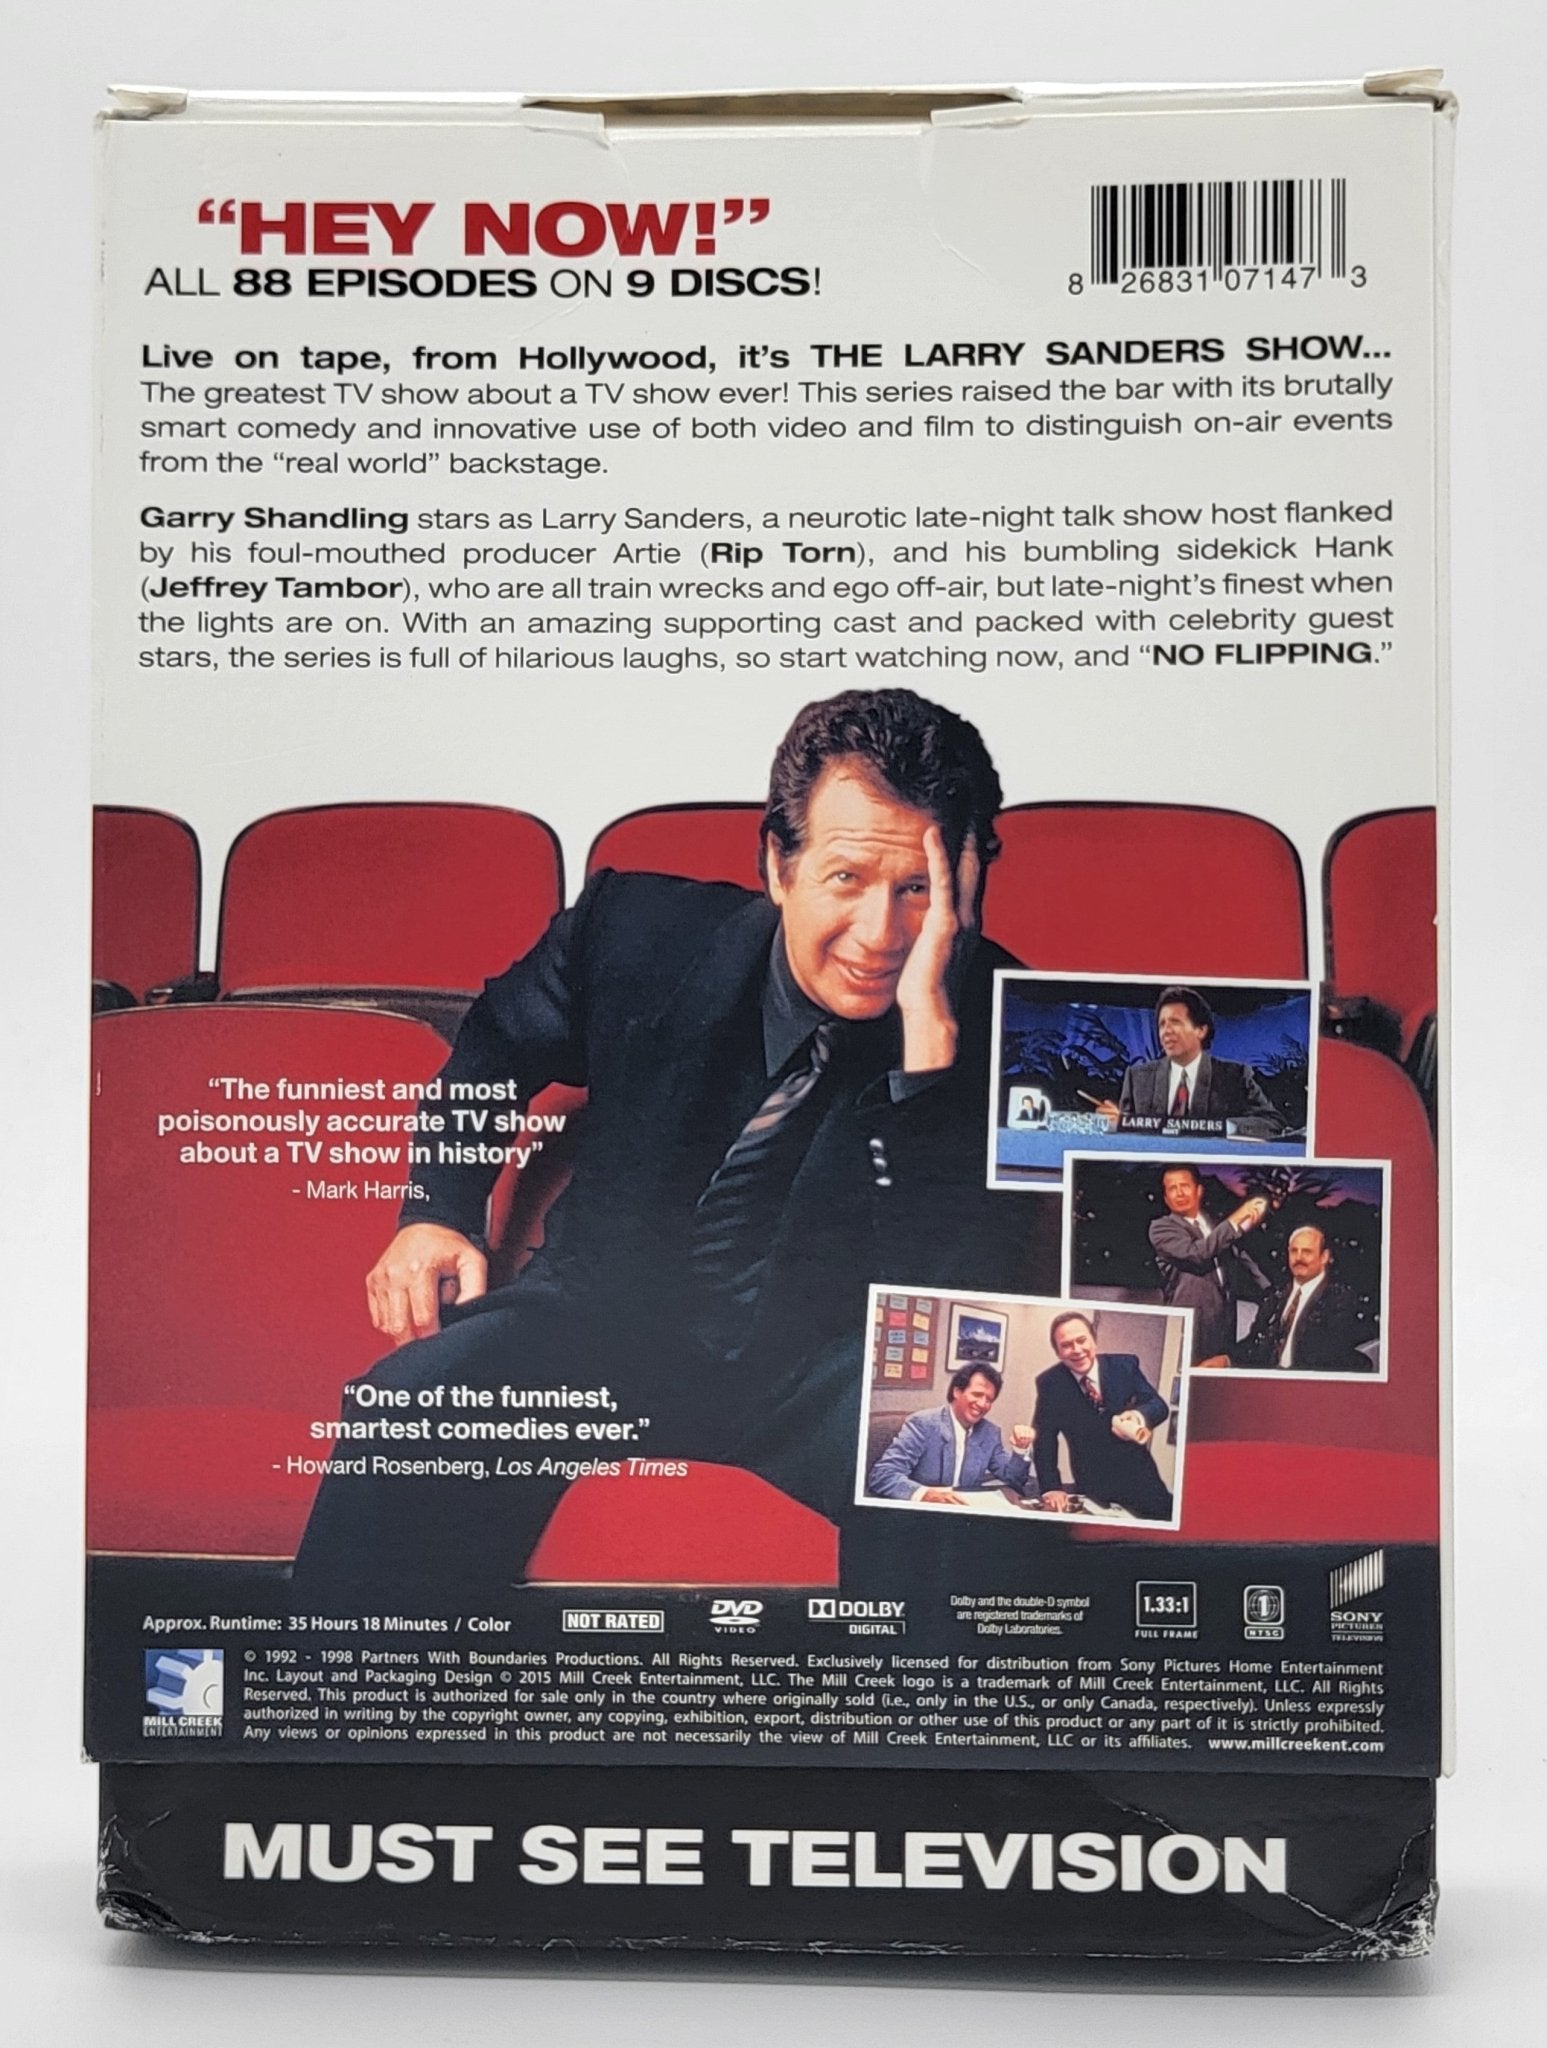 Sony Pictures Home Entertainment - The Larry Sanders Show - The Complete Series | DVD | 9 Disc Set - DVD - Steady Bunny Shop